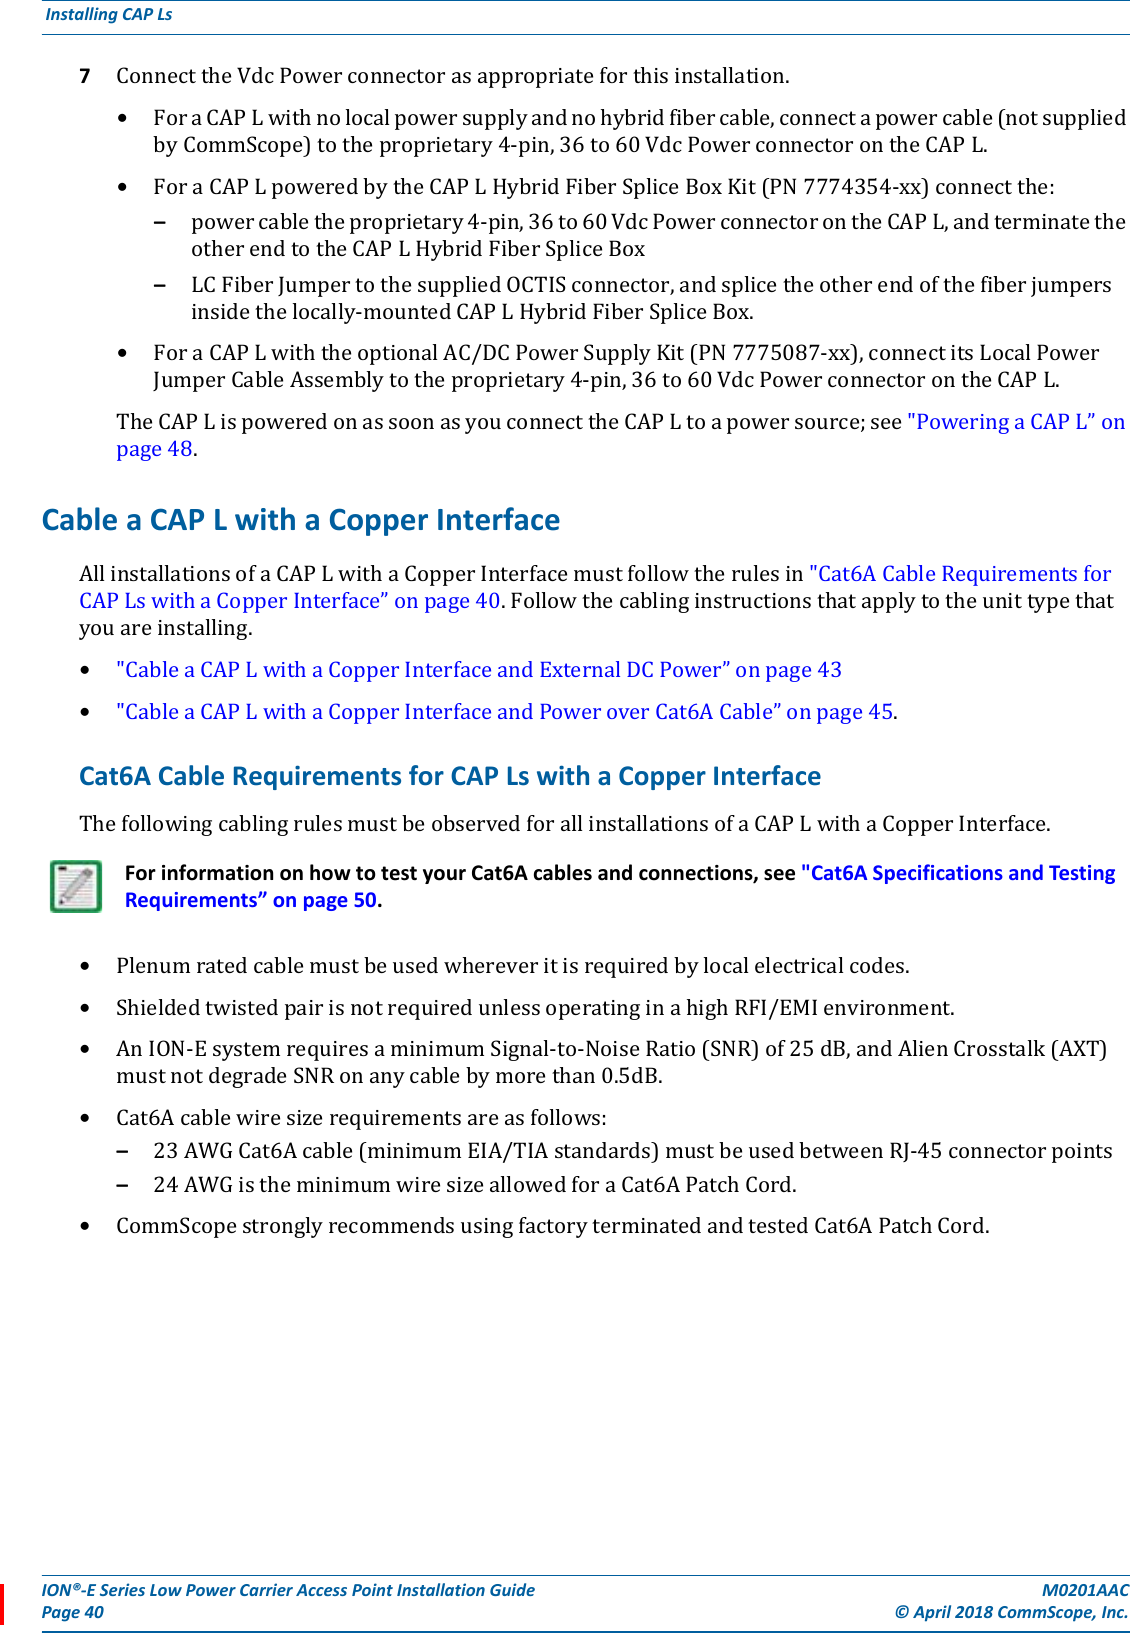 ION®-E Series Low Power Carrier Access Point Installation Guide M0201AACPage 40 © April 2018 CommScope, Inc. Installing CAP Ls  7ConnecttheVdcPowerconnectorasappropriateforthisinstallation.•ForaCAPLwithnolocalpowersupplyandnohybridfibercable,connectapowercable(notsuppliedbyCommScope)totheproprietary4-pin,36to60VdcPowerconnectorontheCAPL.•ForaCAPLpoweredbytheCAPLHybridFiberSpliceBoxKit(PN7774354-xx)connectthe:–powercabletheproprietary4-pin,36to60VdcPowerconnectorontheCAPL,andterminatetheotherendtotheCAPLHybridFiberSpliceBox–LCFiberJumpertothesuppliedOCTISconnector,andsplicetheotherendofthefiberjumpersinsidethelocally-mountedCAPLHybridFiberSpliceBox.•ForaCAPLwiththeoptionalAC/DCPowerSupplyKit(PN7775087-xx),connectitsLocalPowerJumperCableAssemblytotheproprietary4-pin,36to60VdcPowerconnectorontheCAPL.TheCAPLispoweredonassoonasyouconnecttheCAPLtoapowersource;see&quot;PoweringaCAPL”onpage48.Cable a CAP L with a Copper InterfaceAllinstallationsofaCAPLwithaCopperInterfacemustfollowtherulesin&quot;Cat6ACableRequirementsforCAPLswithaCopperInterface”onpage40.Followthecablinginstructionsthatapplytotheunittypethatyouareinstalling.•&quot;CableaCAPLwithaCopperInterfaceandExternalDCPower”onpage43•&quot;CableaCAPLwithaCopperInterfaceandPoweroverCat6ACable”onpage45.Cat6A Cable Requirements for CAP Ls with a Copper InterfaceThefollowingcablingrulesmustbeobservedforallinstallationsofaCAPLwithaCopperInterface.•Plenumratedcablemustbeusedwhereveritisrequiredbylocalelectricalcodes.•ShieldedtwistedpairisnotrequiredunlessoperatinginahighRFI/EMIenvironment.•AnION-EsystemrequiresaminimumSignal-to-NoiseRatio(SNR)of25dB,andAlienCrosstalk(AXT)mustnotdegradeSNRonanycablebymorethan0.5dB.•Cat6Acablewiresizerequirementsareasfollows:–23AWGCat6Acable(minimumEIA/TIAstandards)mustbeusedbetweenRJ-45connectorpoints–24AWGistheminimumwiresizeallowedforaCat6APatchCord.•CommScopestronglyrecommendsusingfactoryterminatedandtestedCat6APatchCord.For information on how to test your Cat6A cables and connections, see &quot;Cat6A Specifications and Testing Requirements” on page 50.